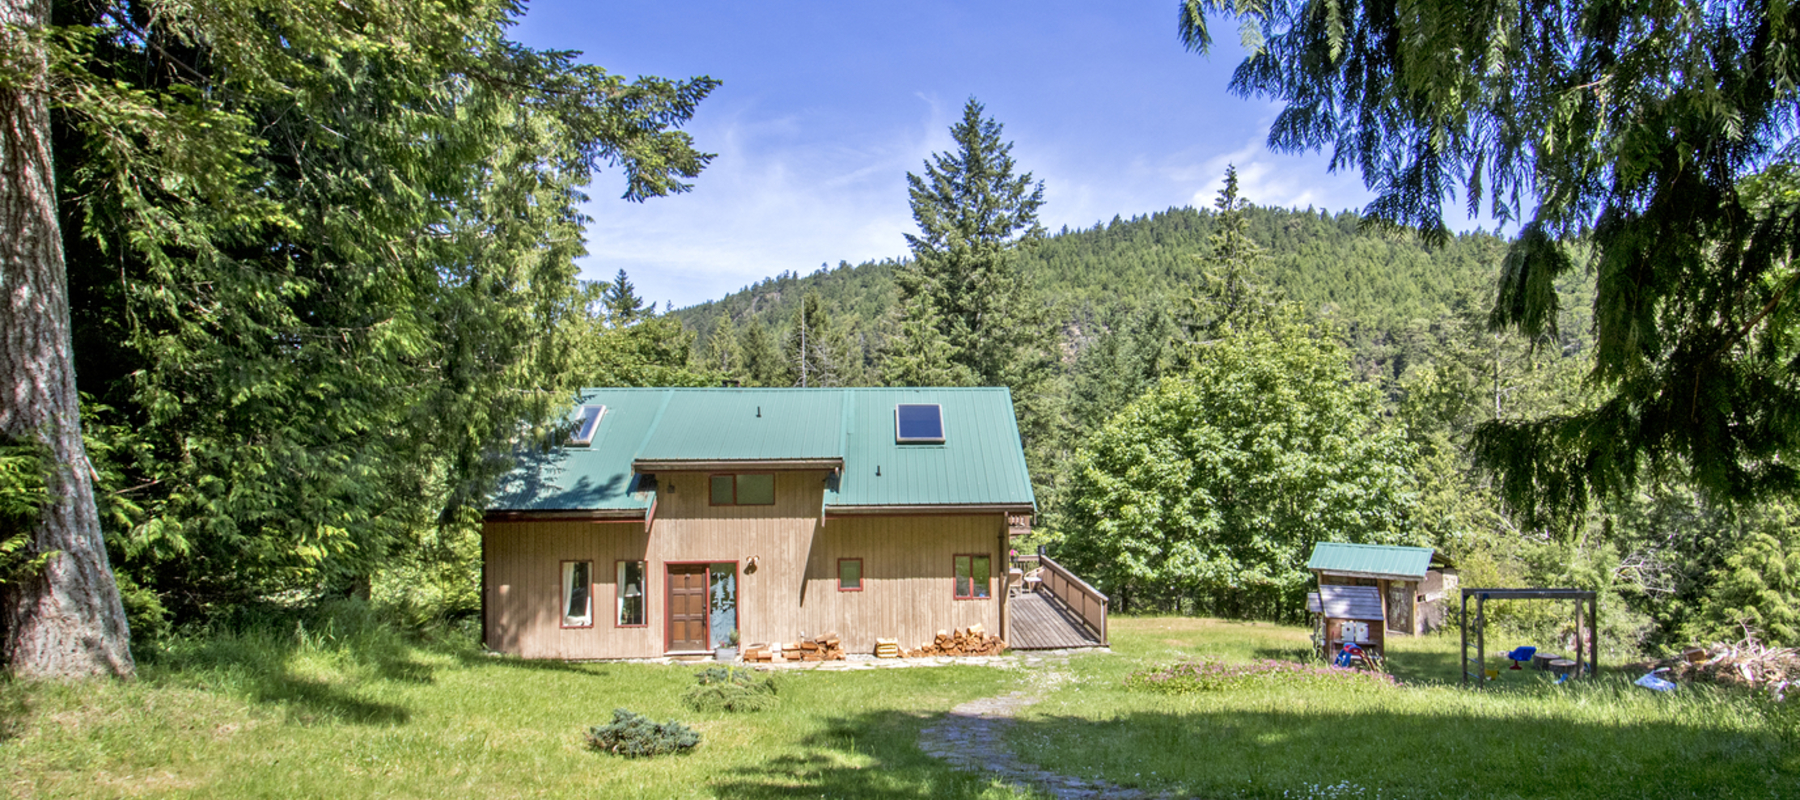 Cottage in the Woods, 113 Narvaez Bay Rd, Saturna Island